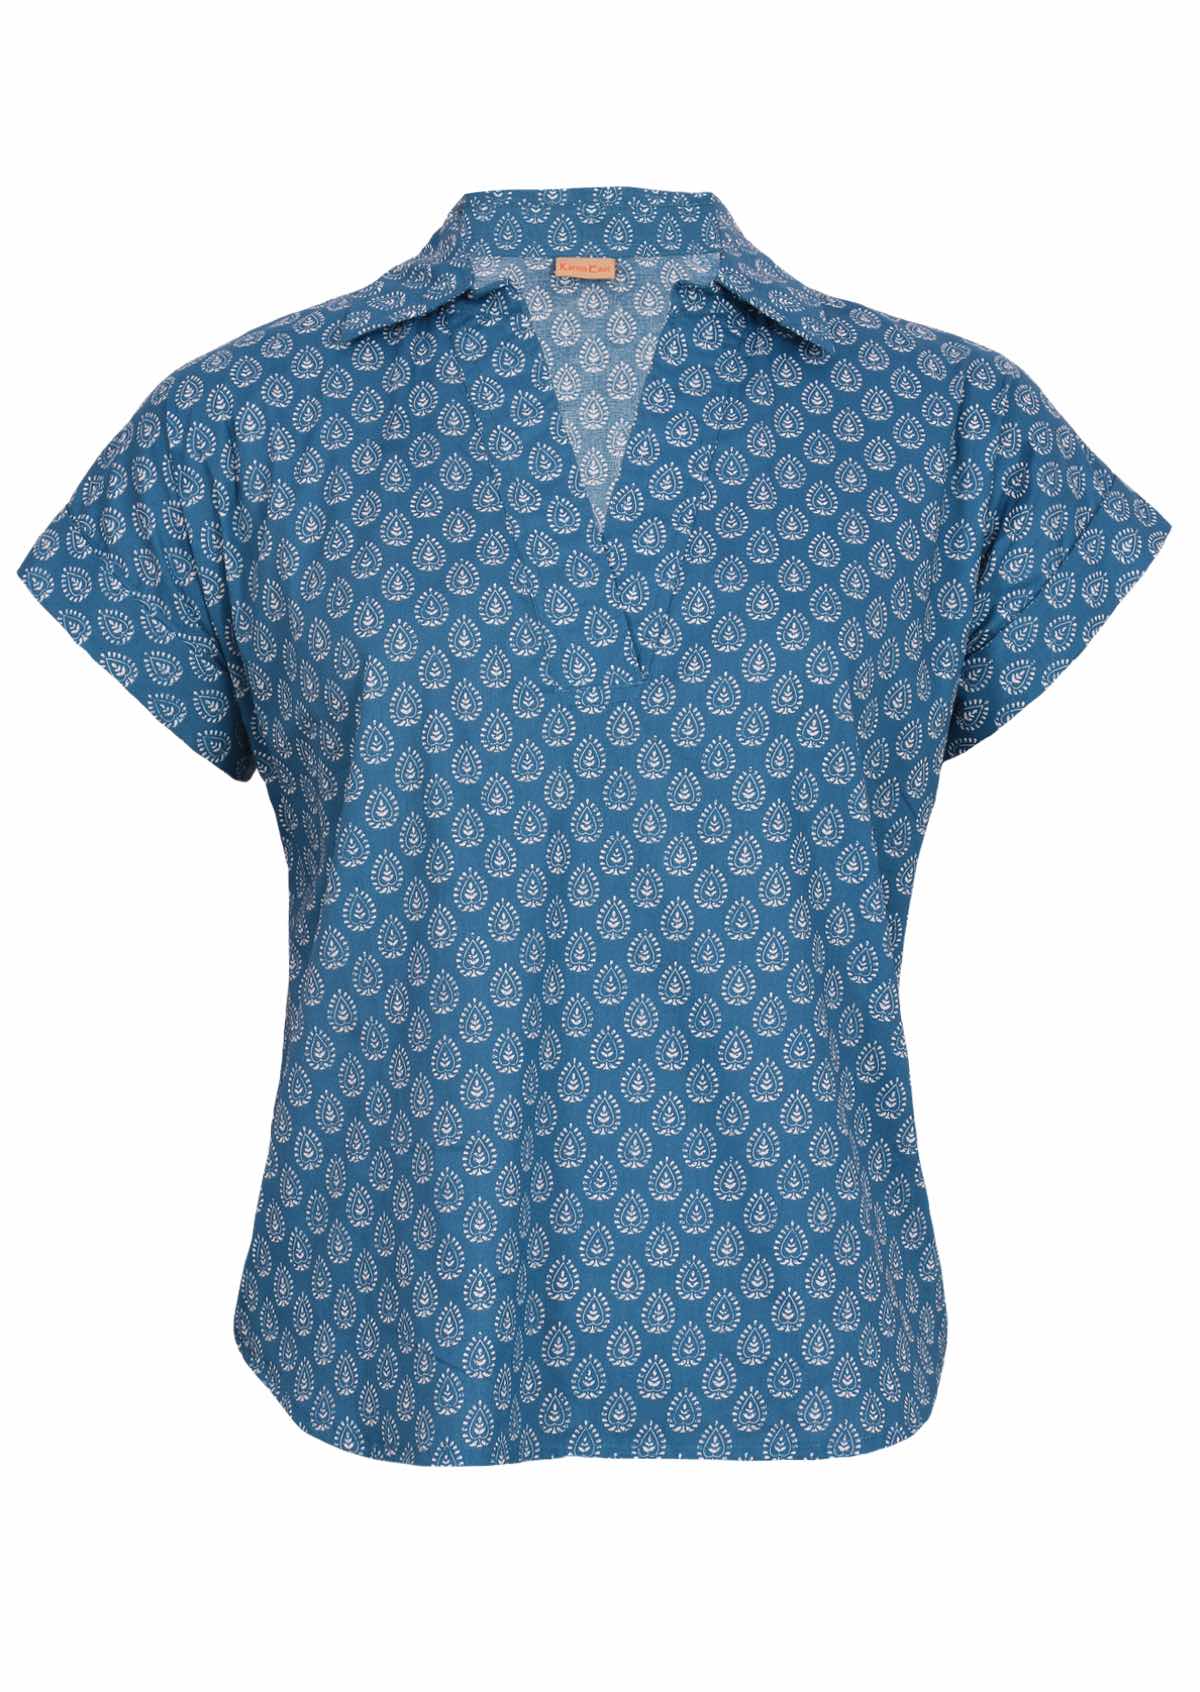 Short sleeve shirt with a blue base and a white decorative print, made with 100% cotton. 